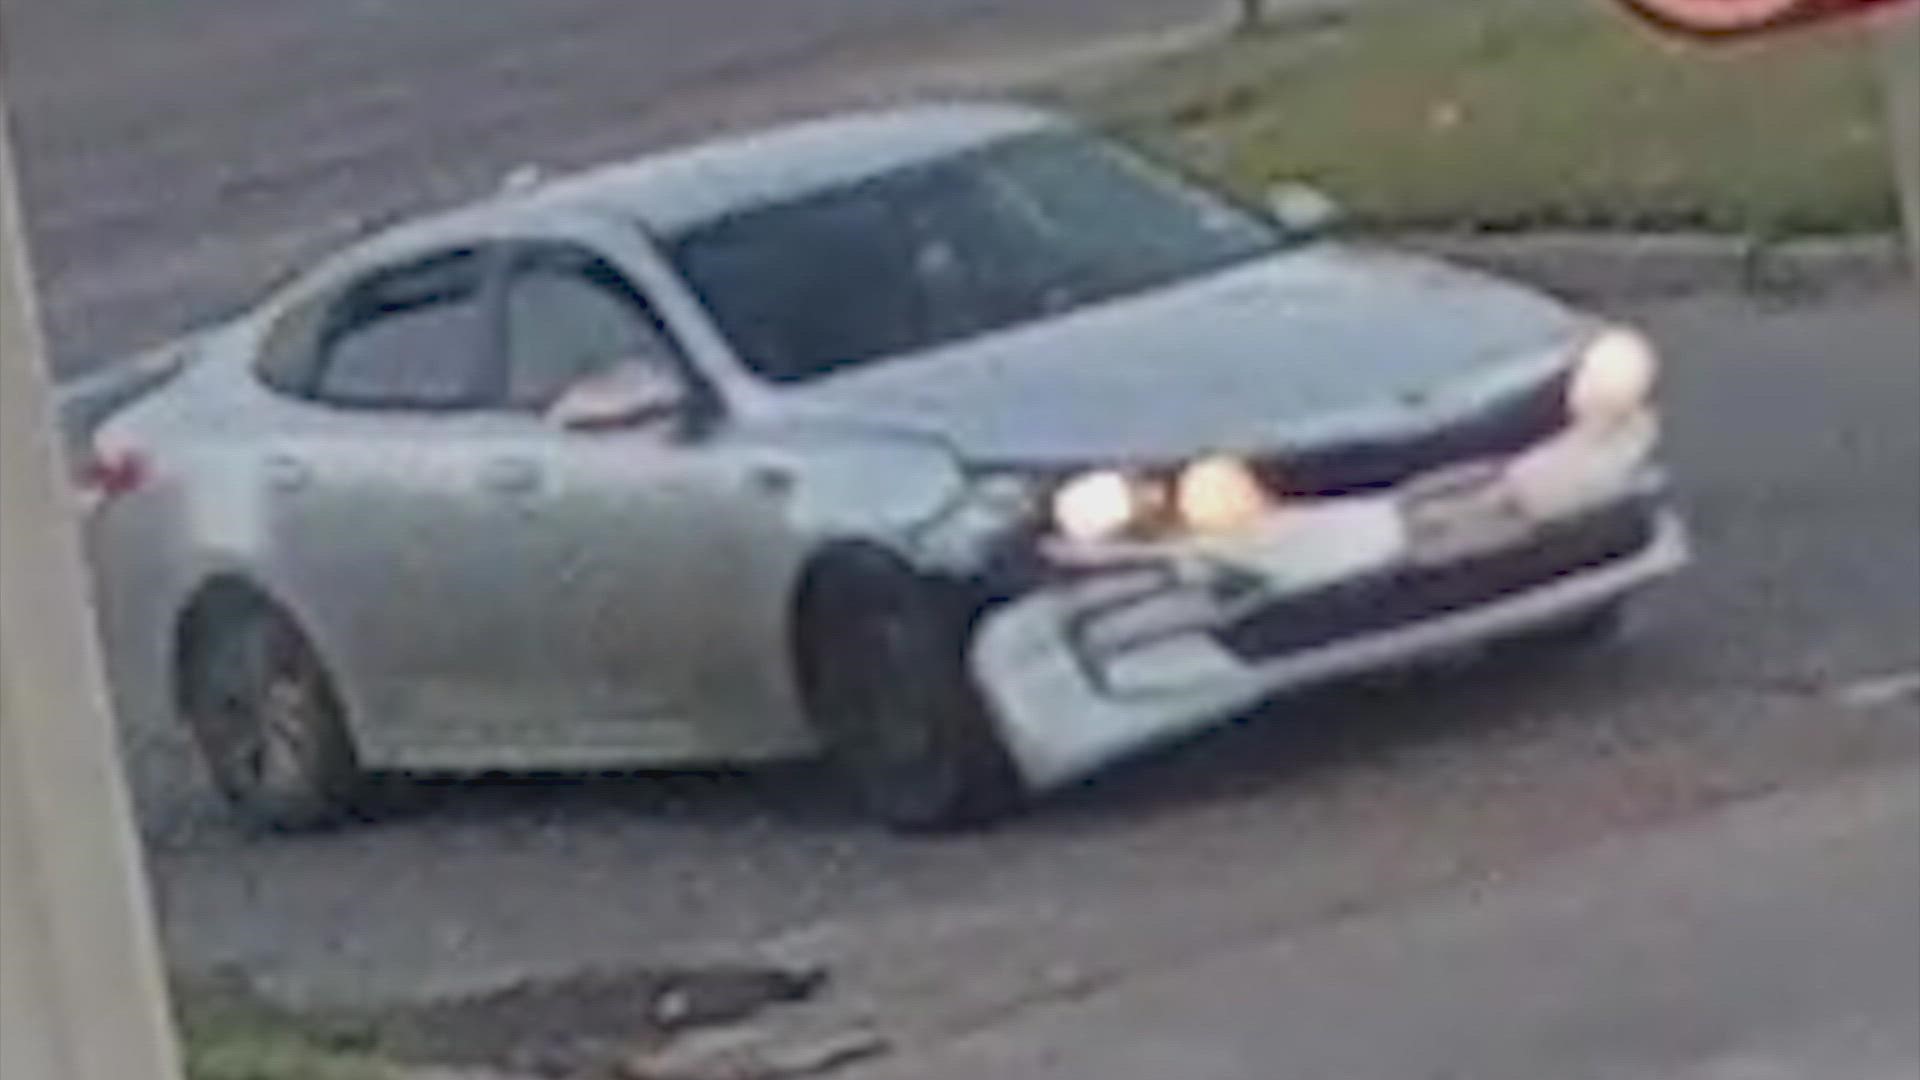 Detectives say someone in a damaged white or gray 4-door sedan, possibly a KIA Optima, fired multiple shots into the victim's home in east Harris County late Sunday.